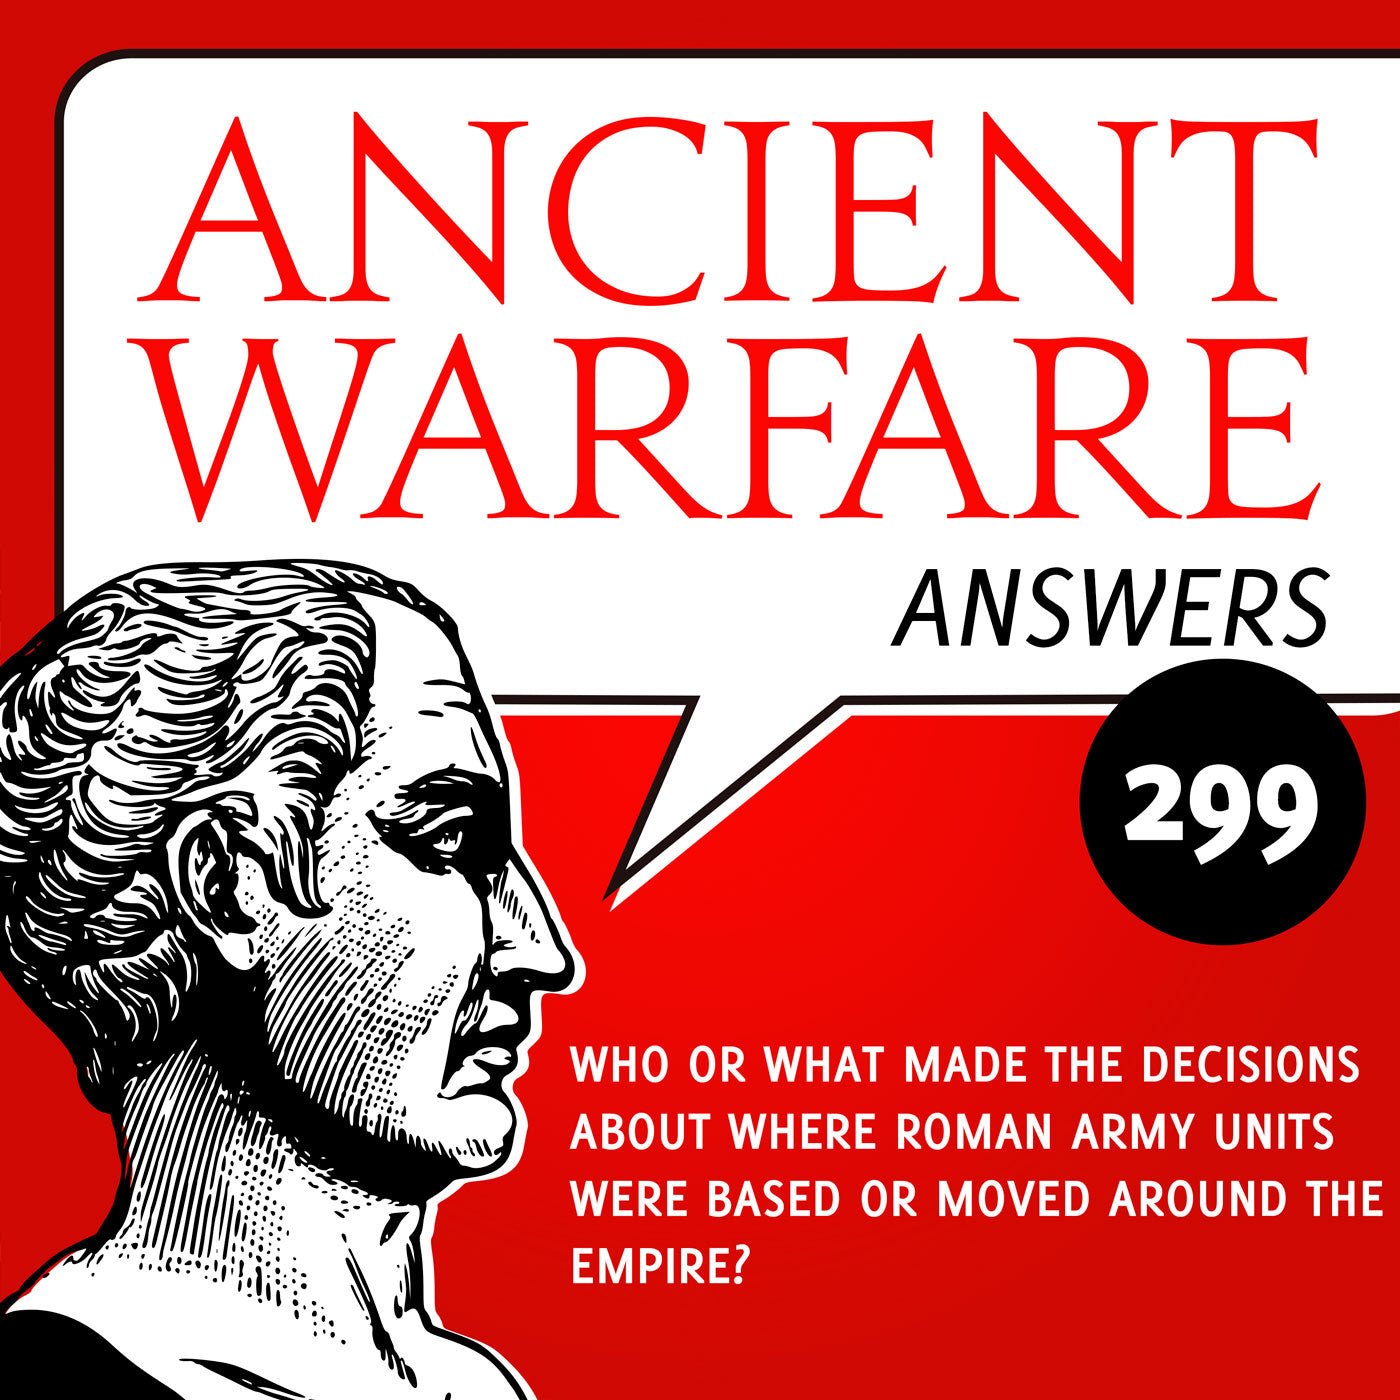 Ancient Warfare Answers (299): Who or what made the decisions about where Roman army units were based or moved around the Empire?